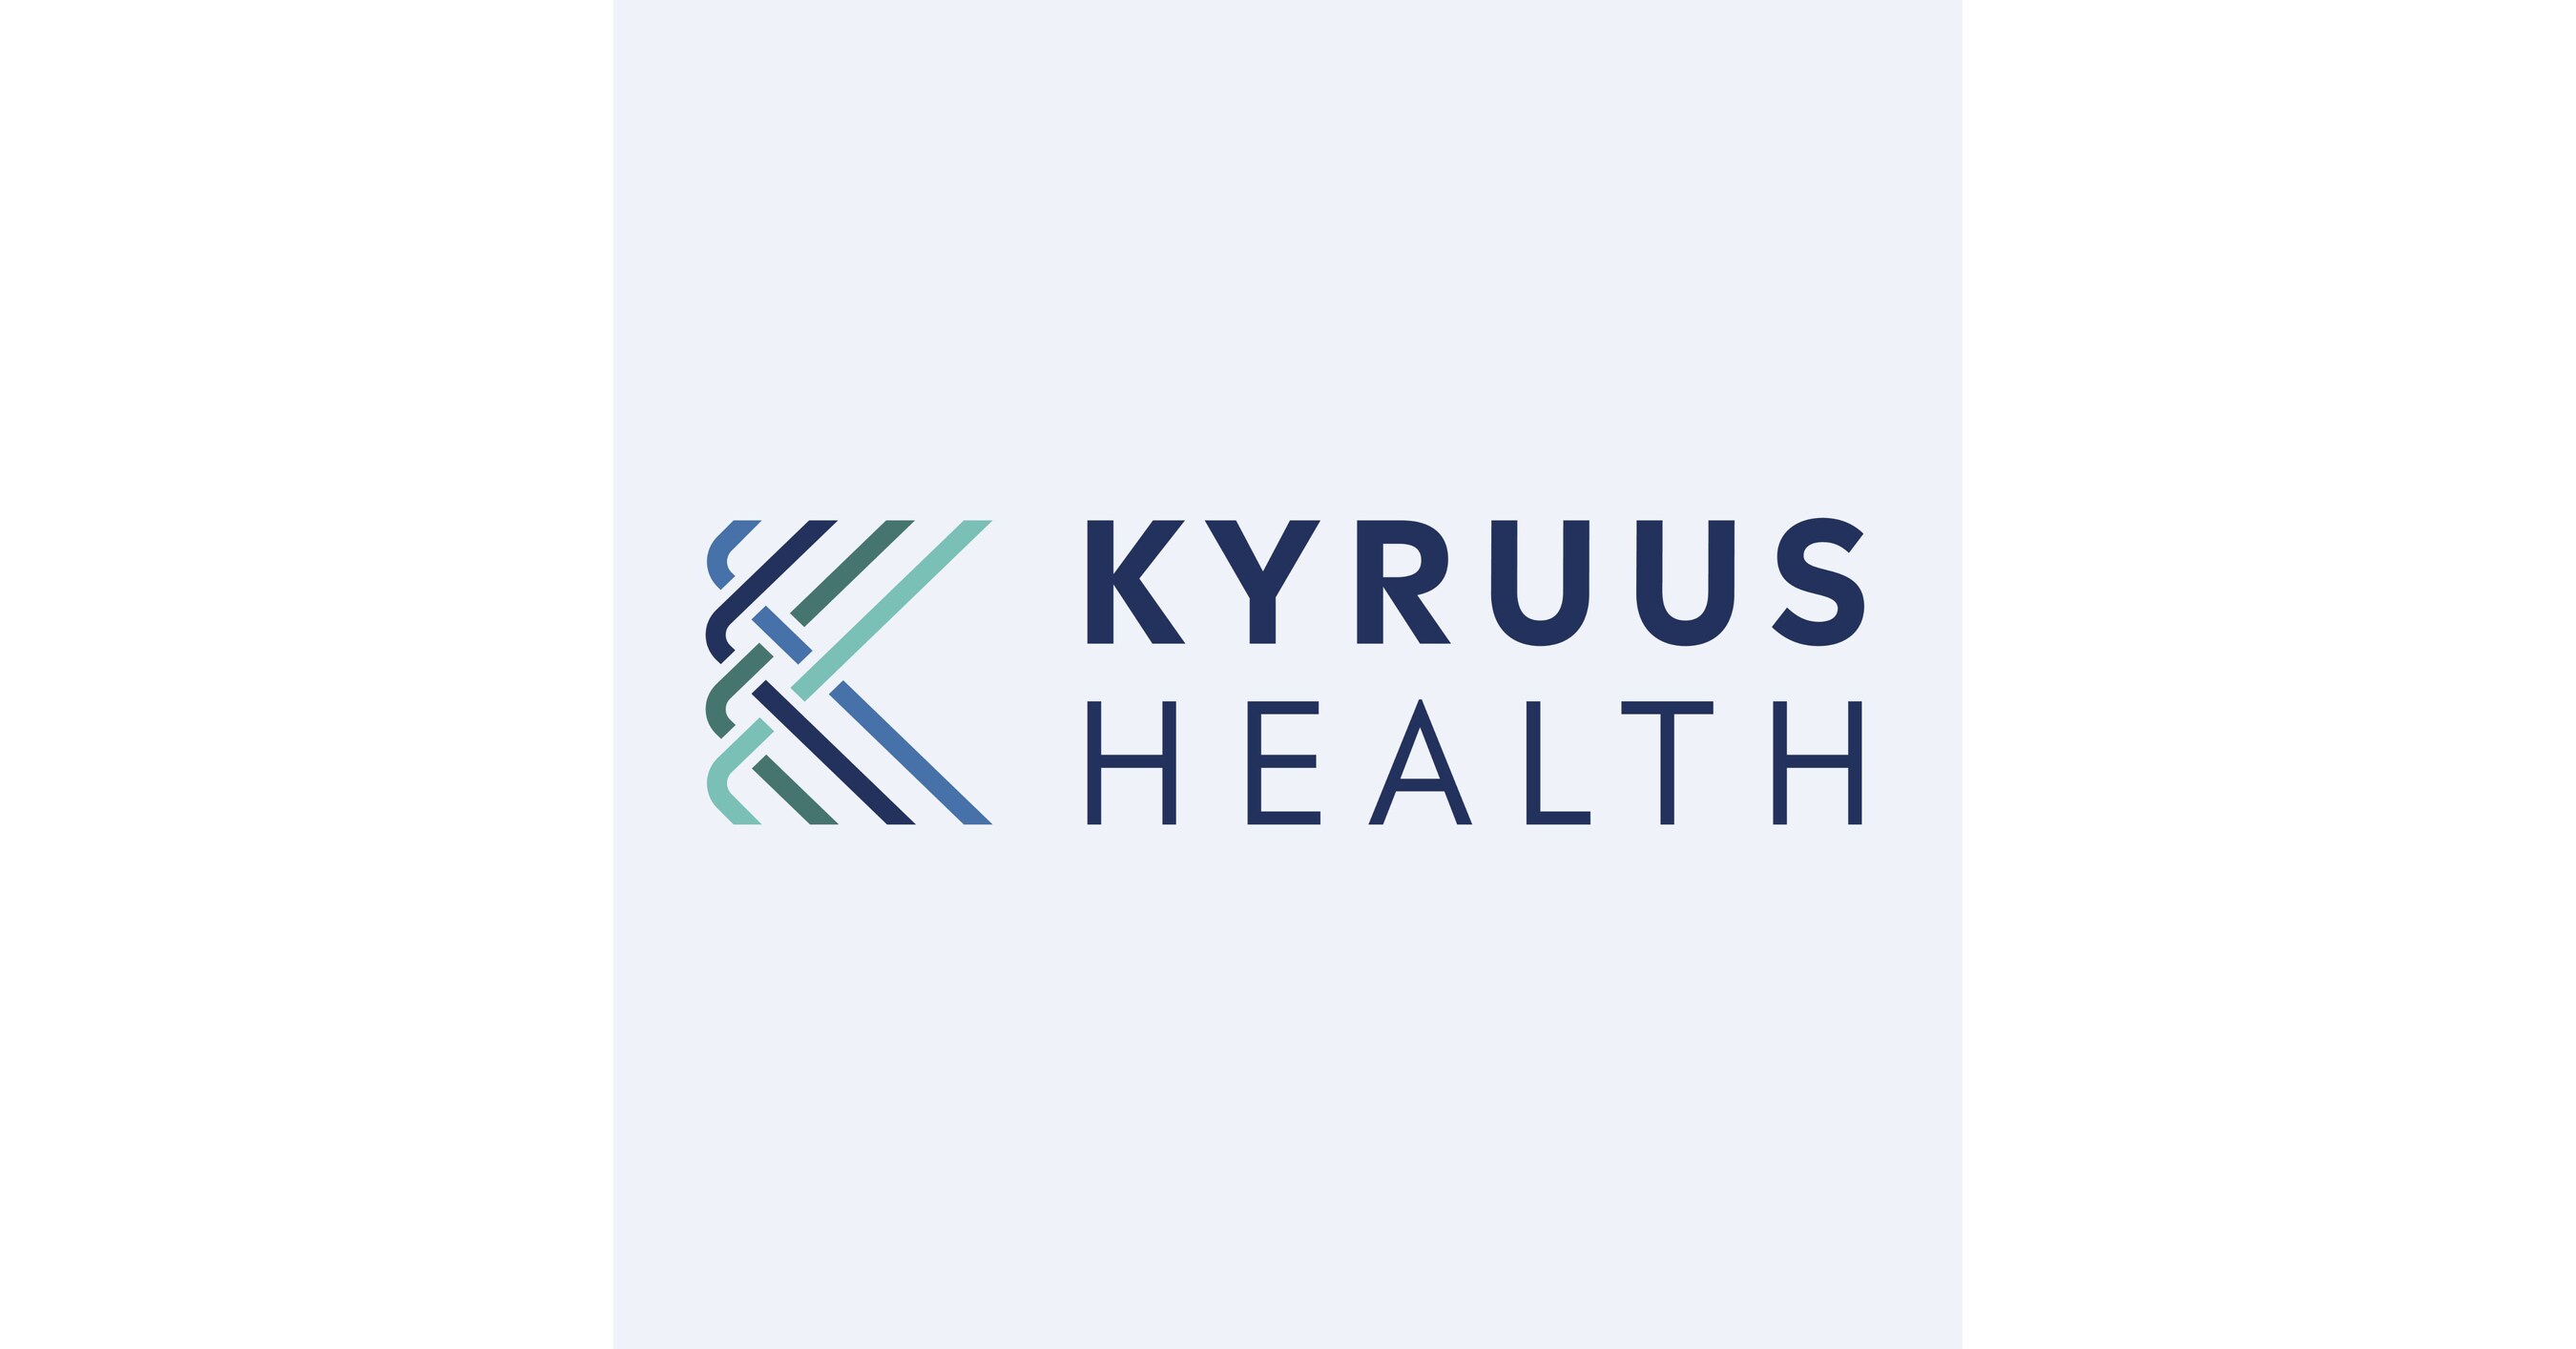 Kyruus Health Expands National Provider Network to Include Virtual Behavioral Health Services to Address Mental Health Needs in the United States